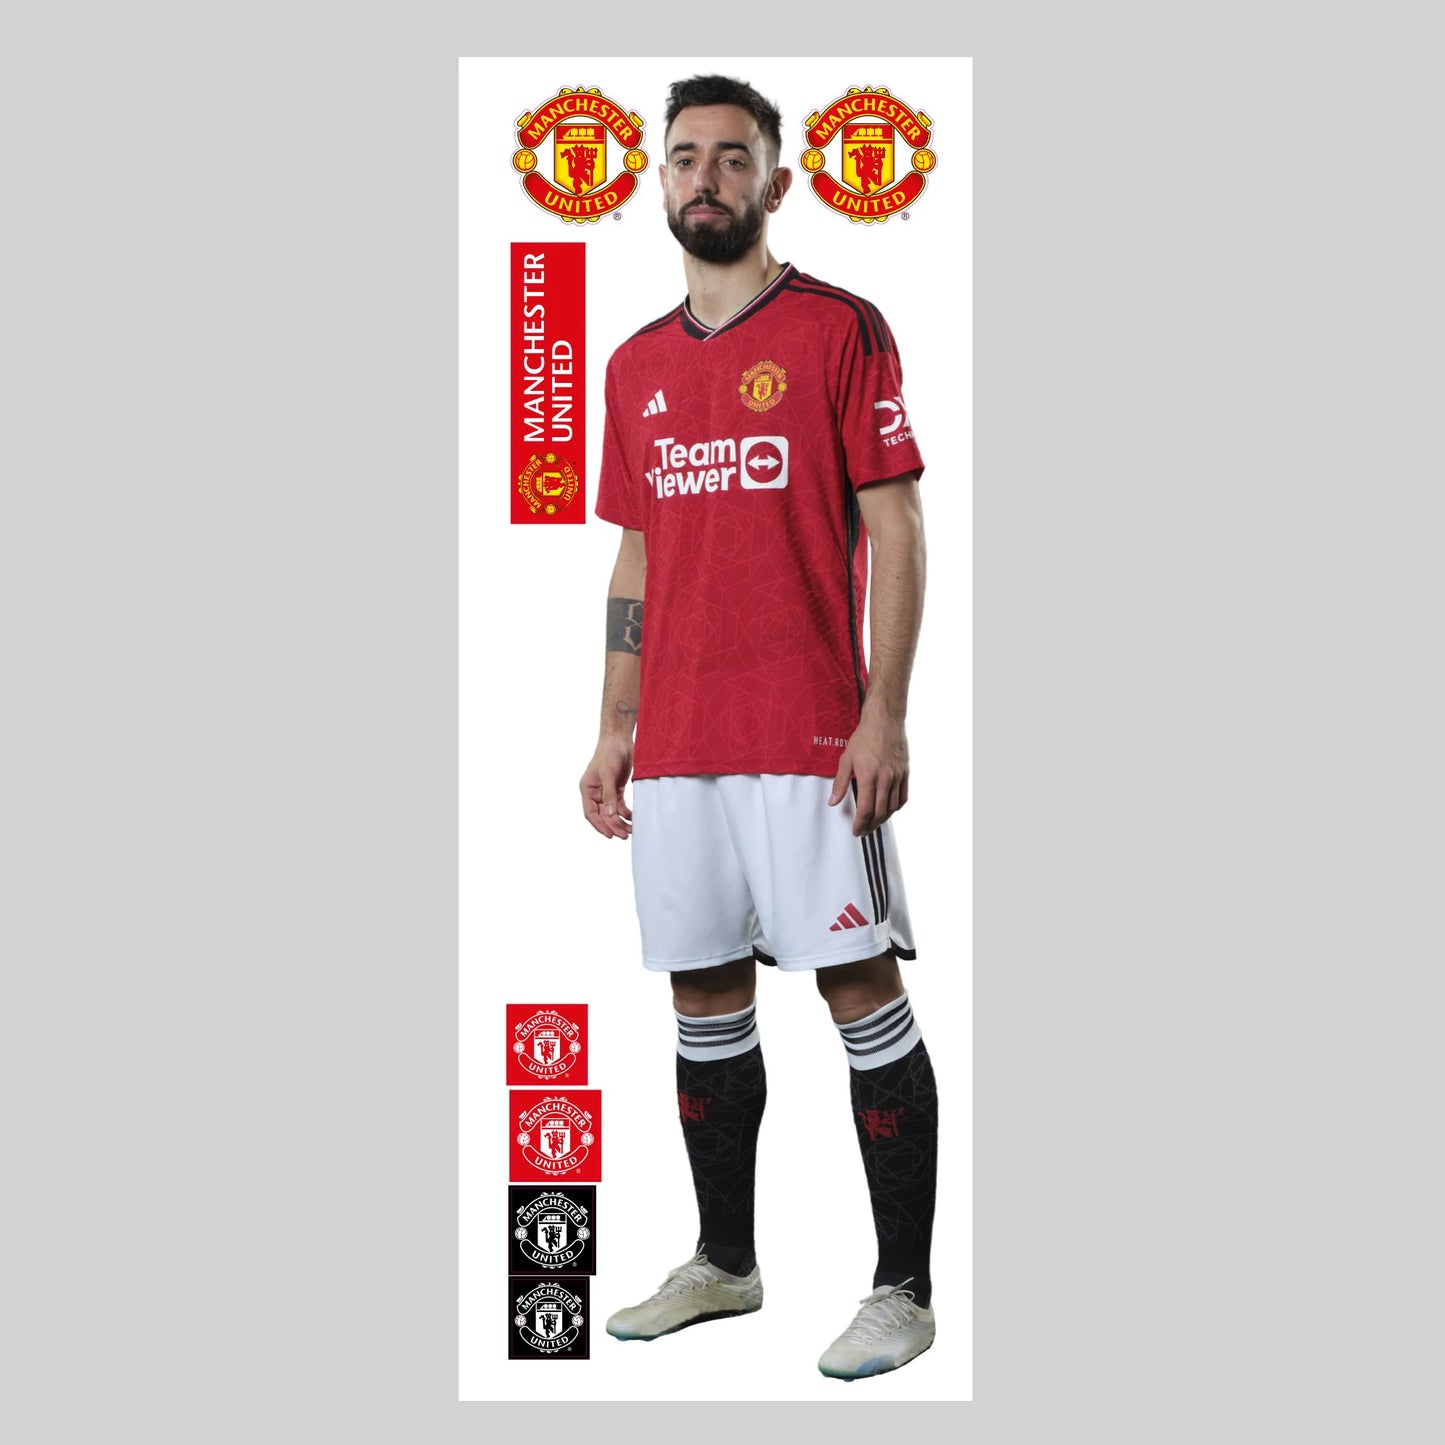 Manchester United FC Wall Sticker - Bruno Fernandes 23/24 Player Wall Decal